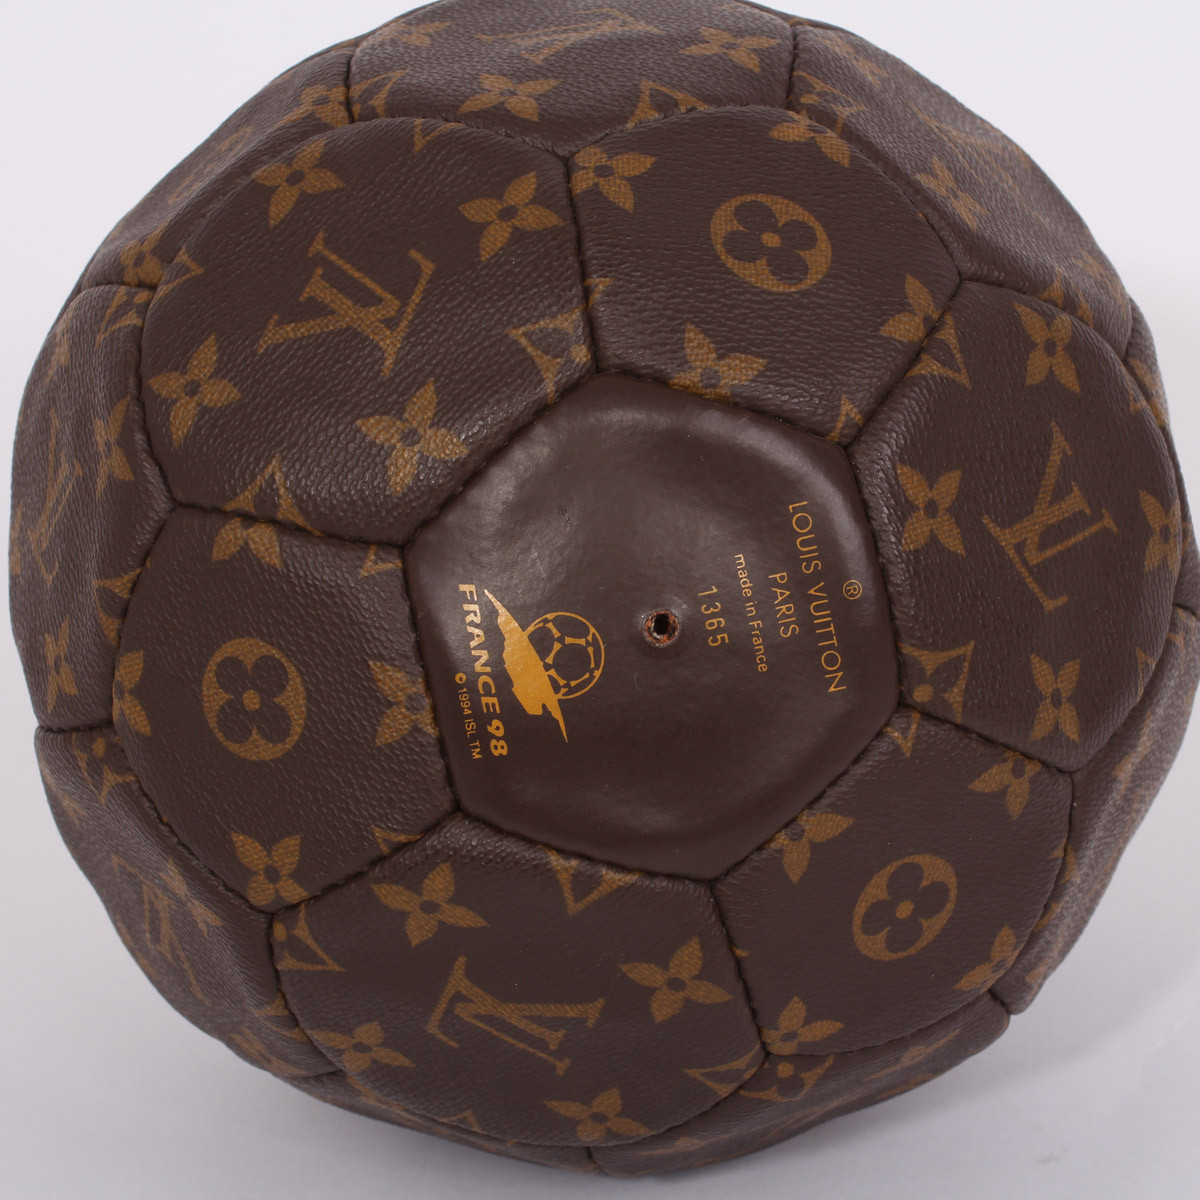 Vuitton soccer ball Limited Edition World Cup1998